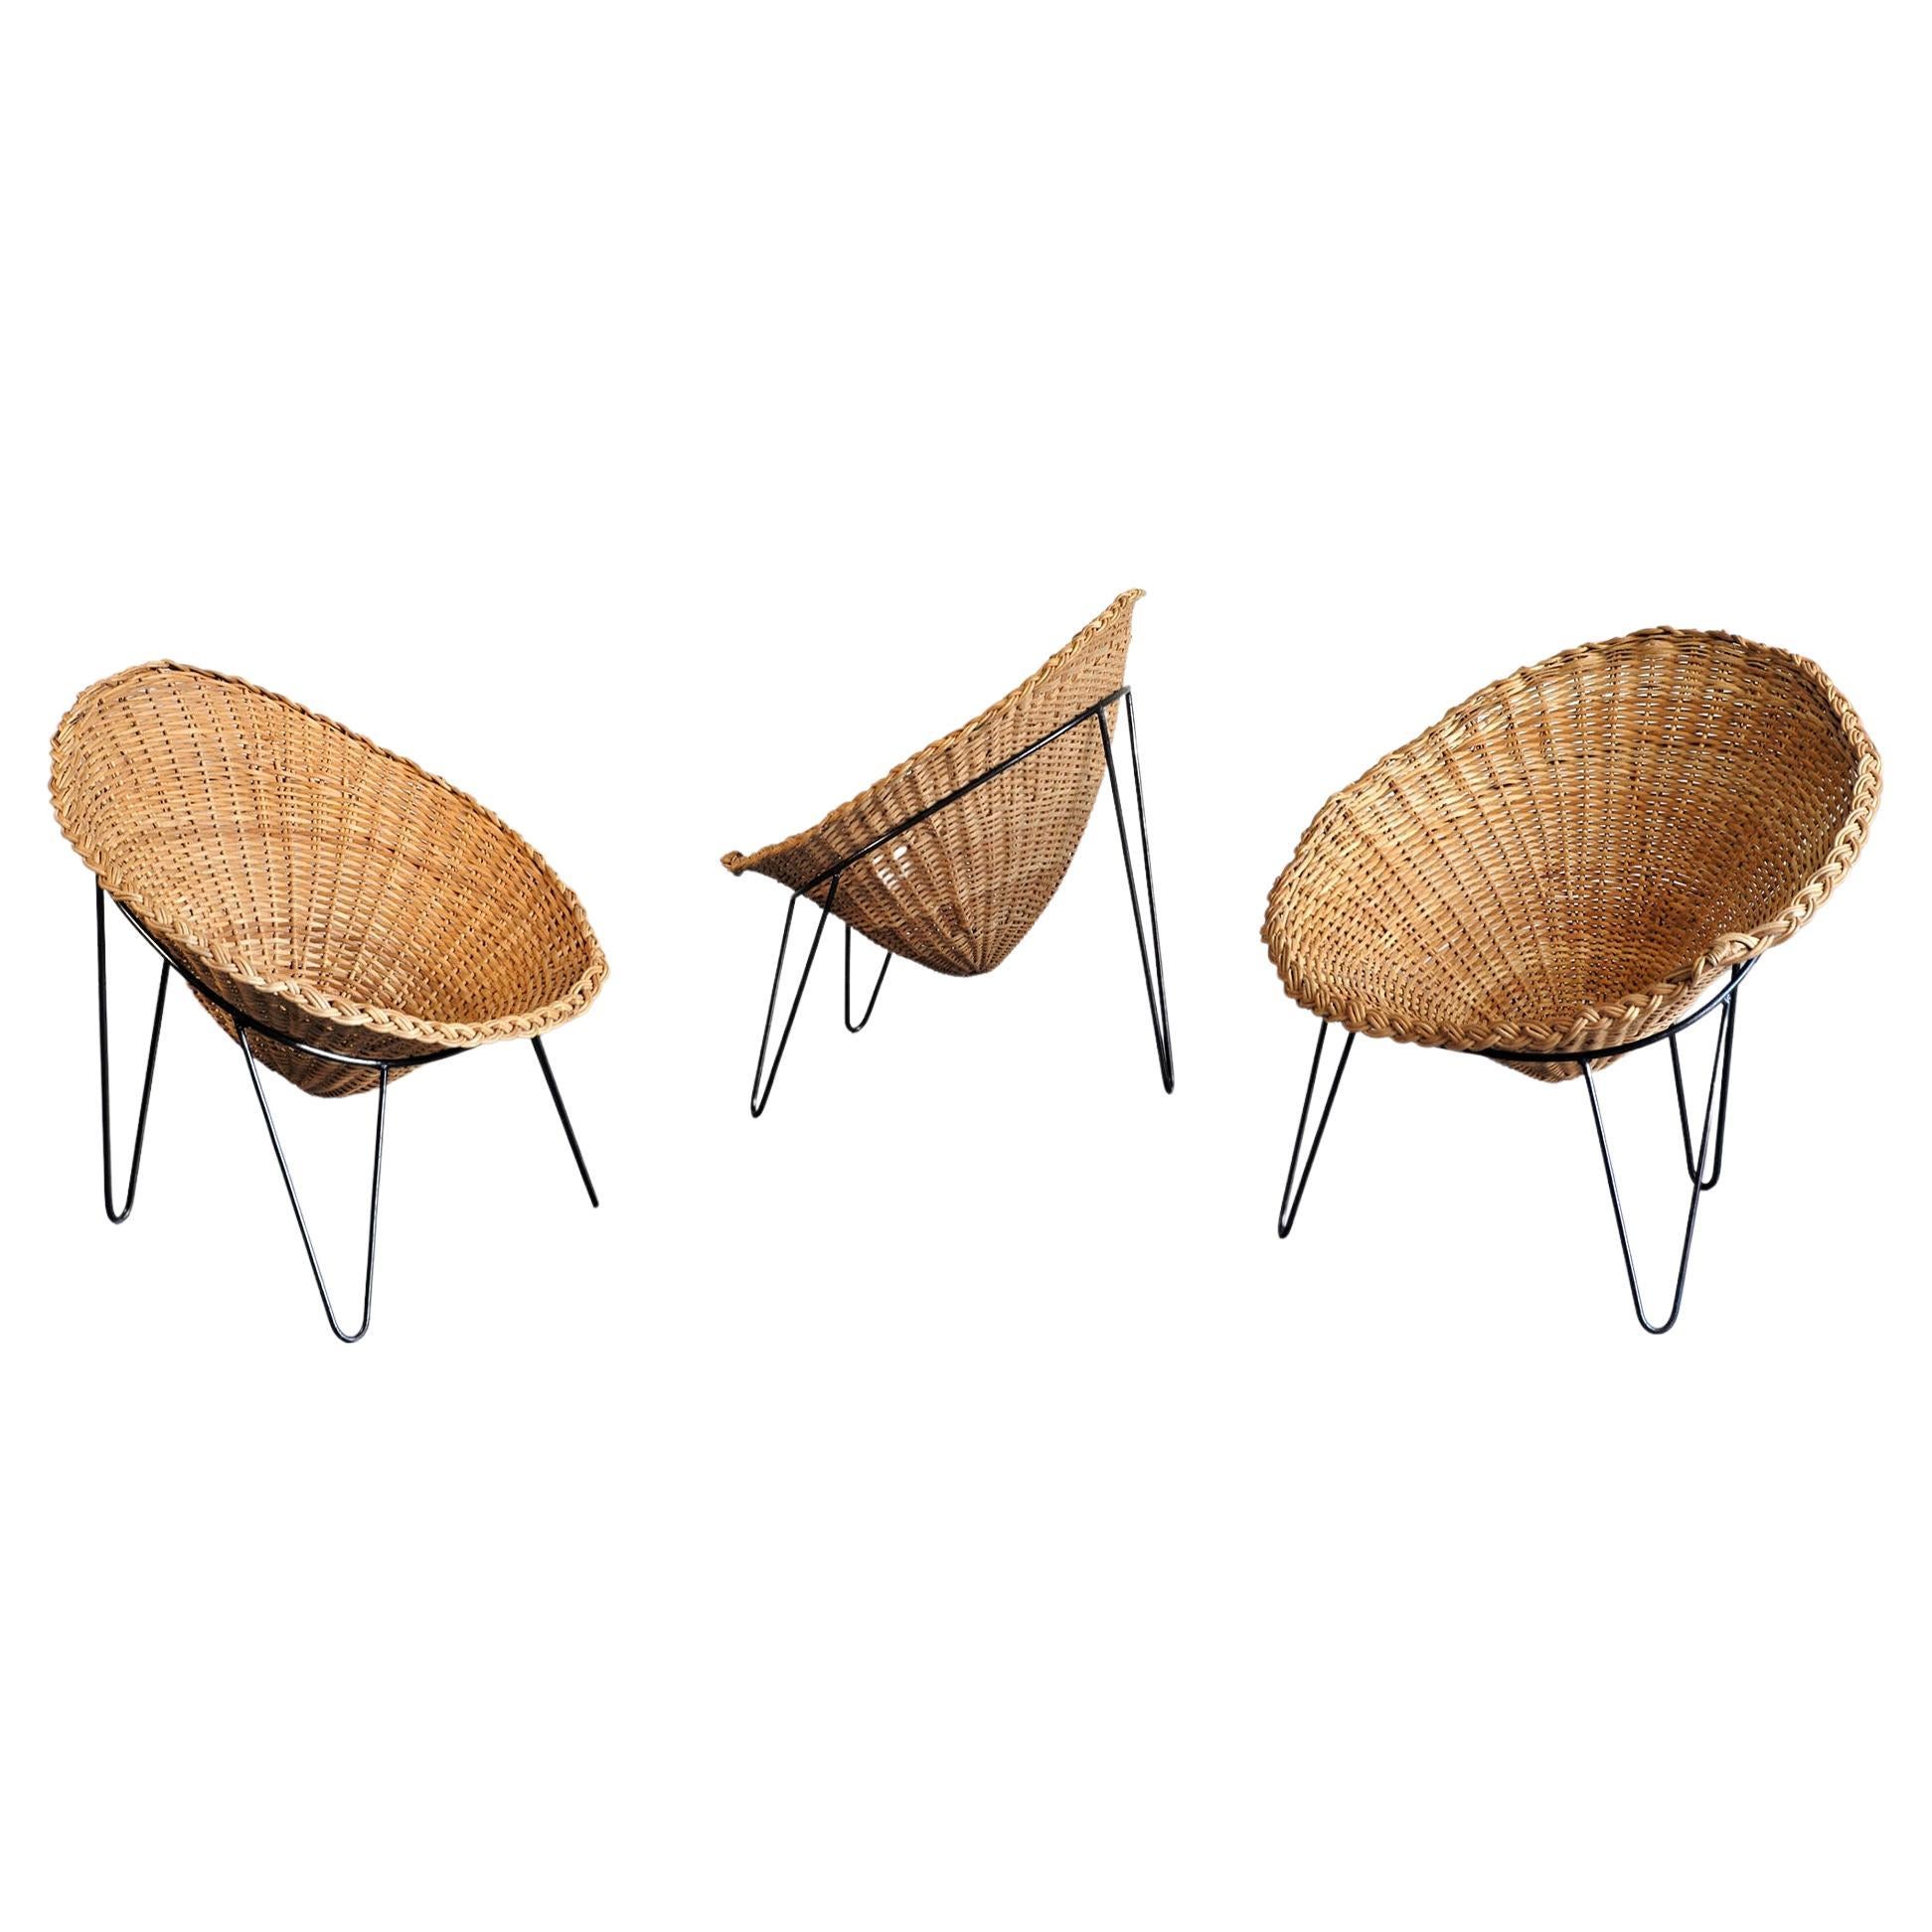 Set of 3 Rattan Armchairs, Italy, 1950